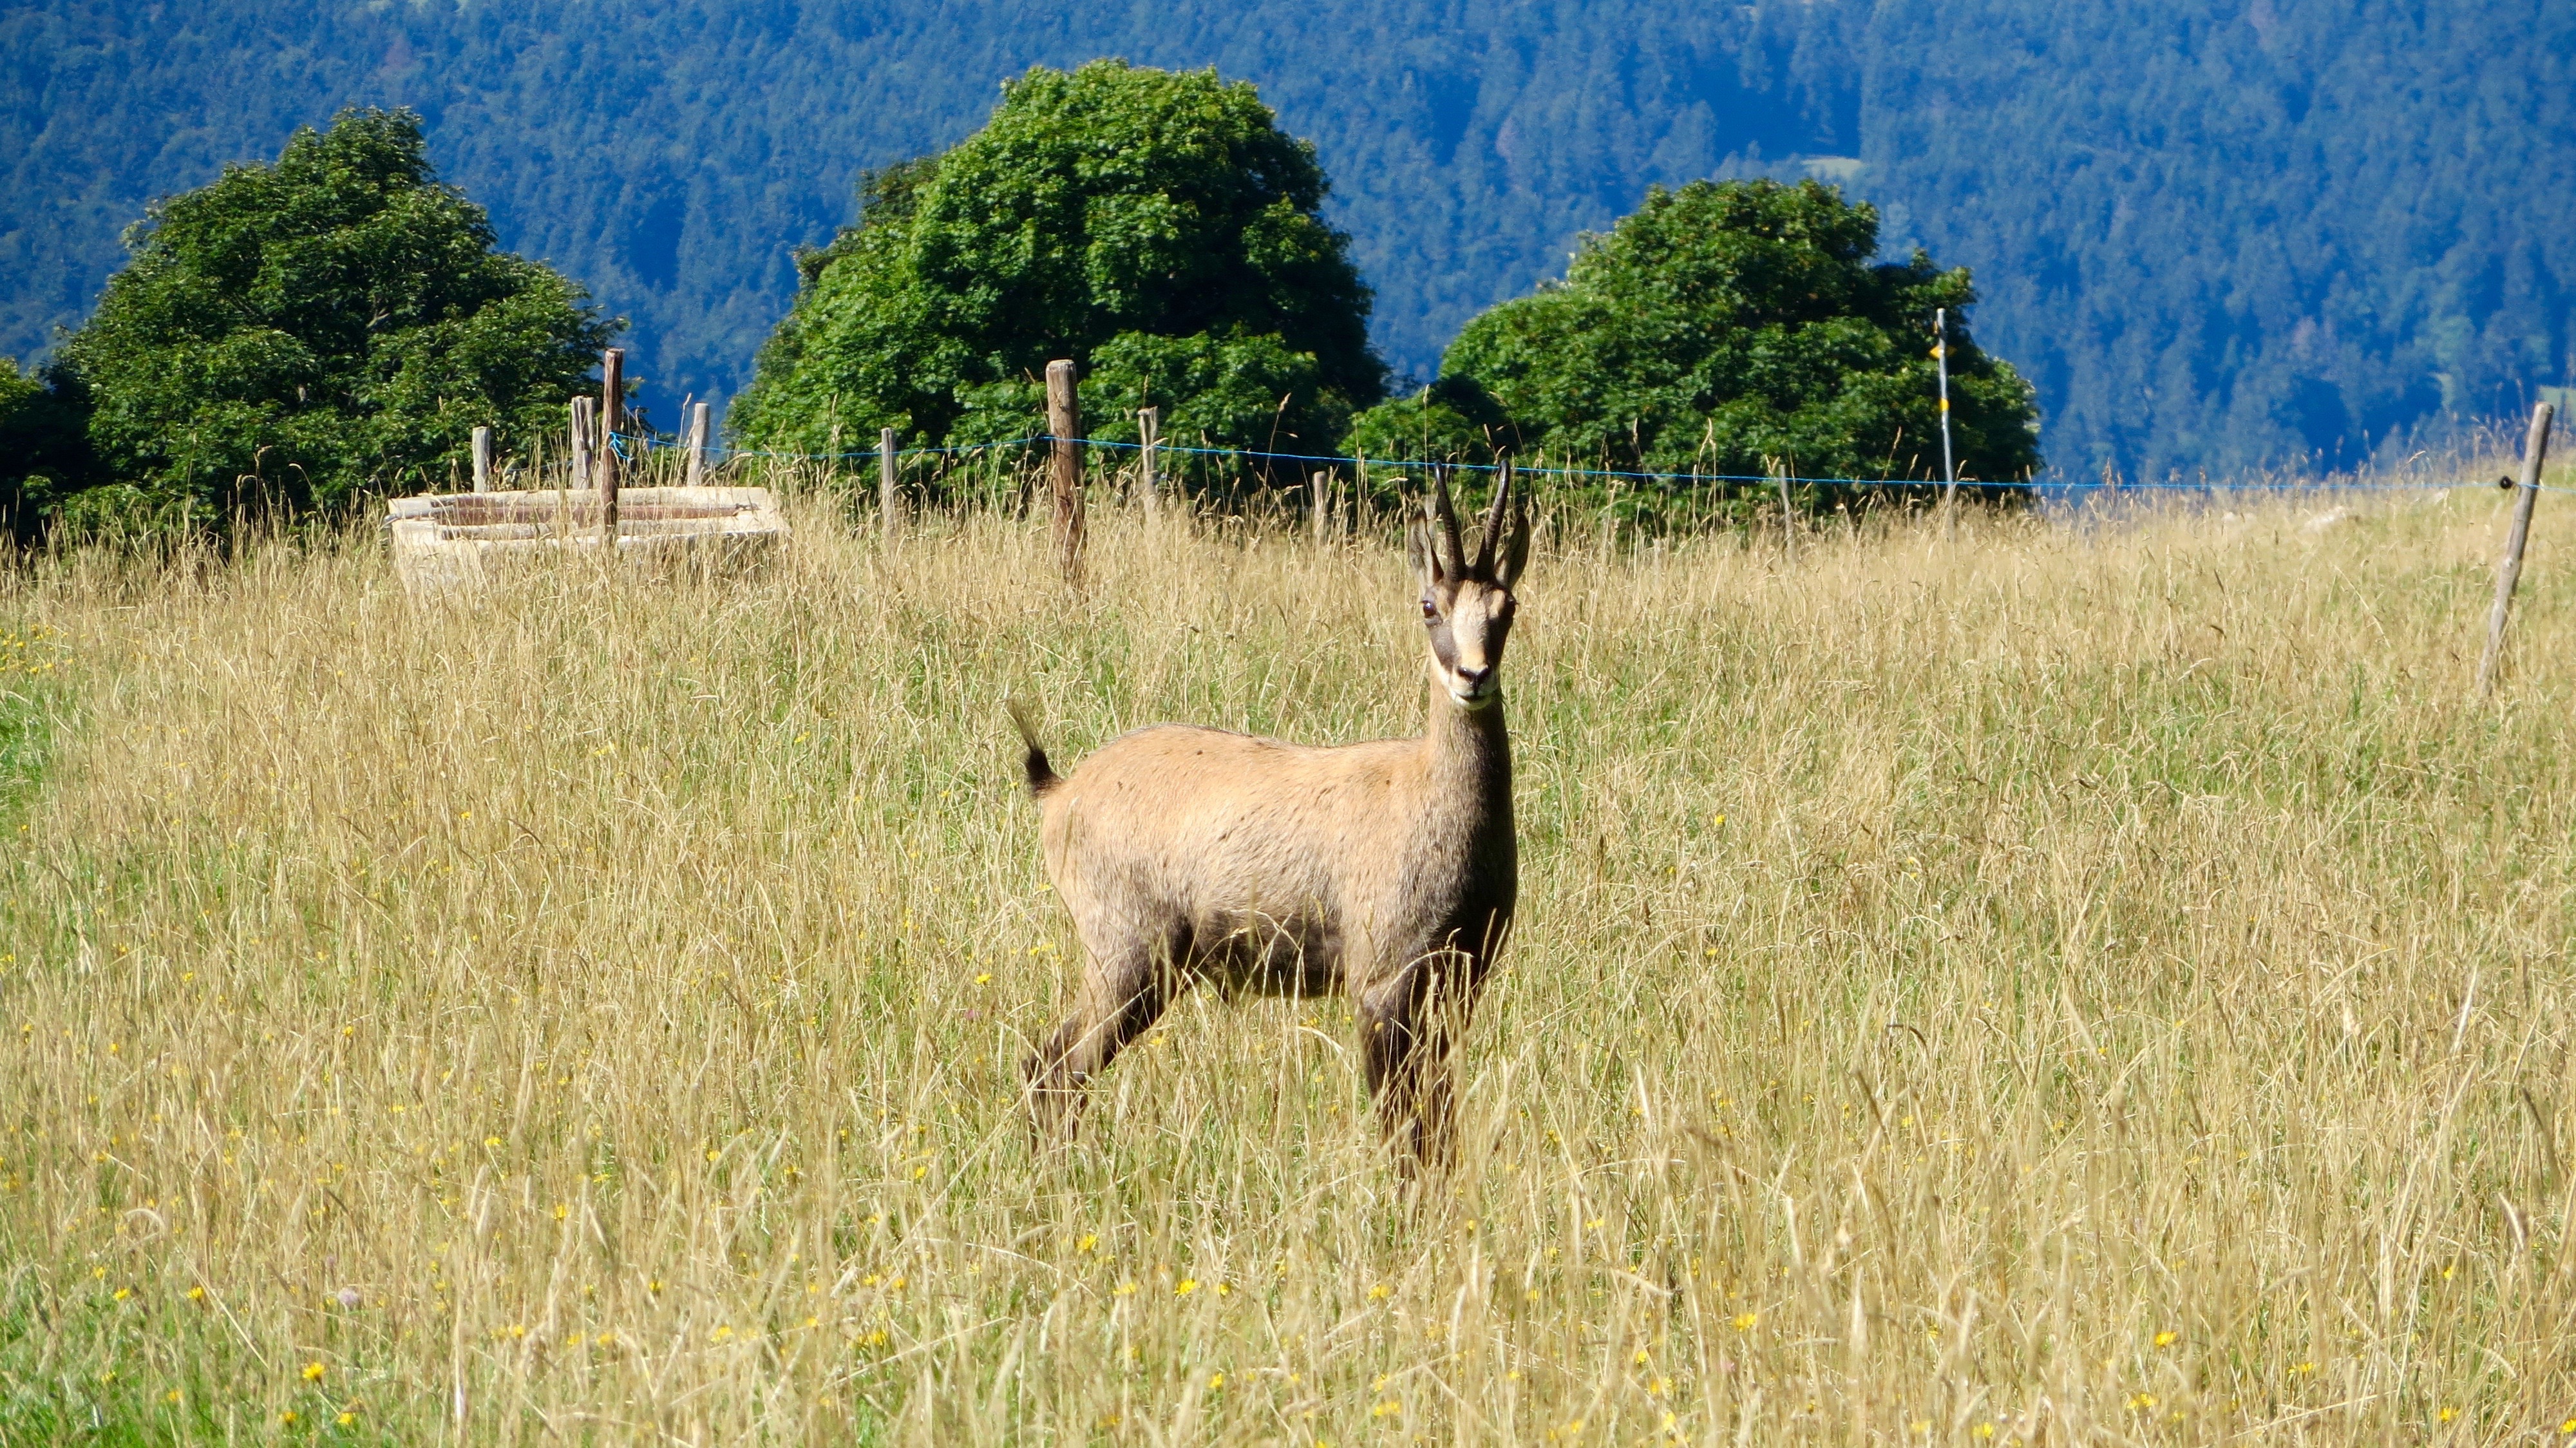 A chamois on August 22, 2015.